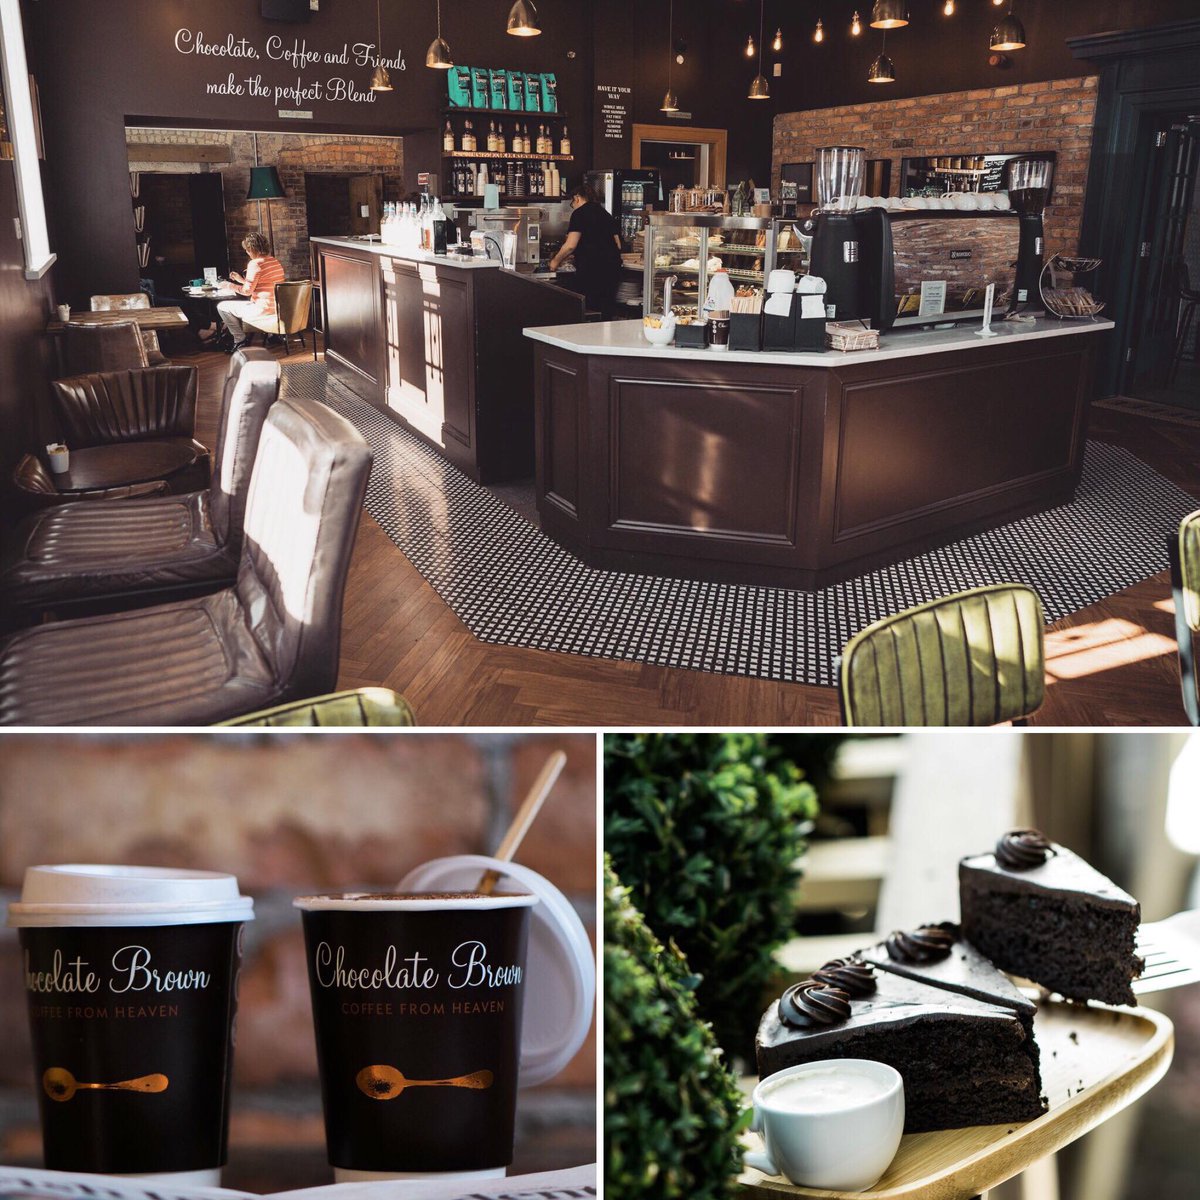 Simply Stunning 😍 The new Chocolate Brown coffee bar in Mullingar is a must visit for any coffee lovers in the area. #matthewalgie #exceptionalcoffee #chocolatebrown #Mullingar #matthewalgiecoffee #baristalife